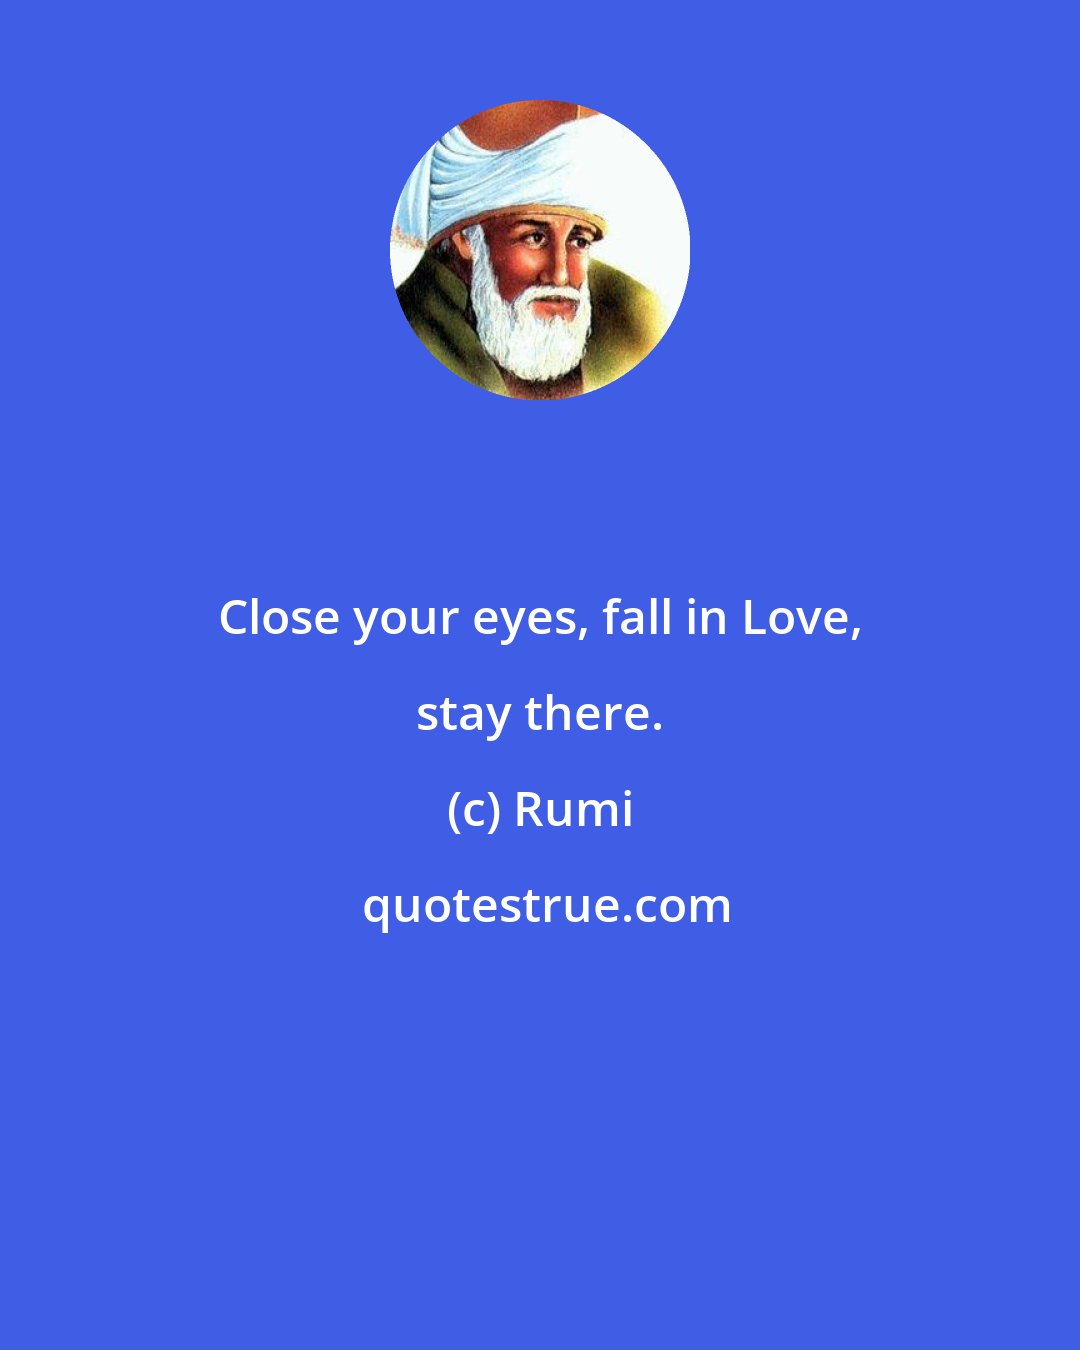 Rumi: Close your eyes, fall in Love, stay there.